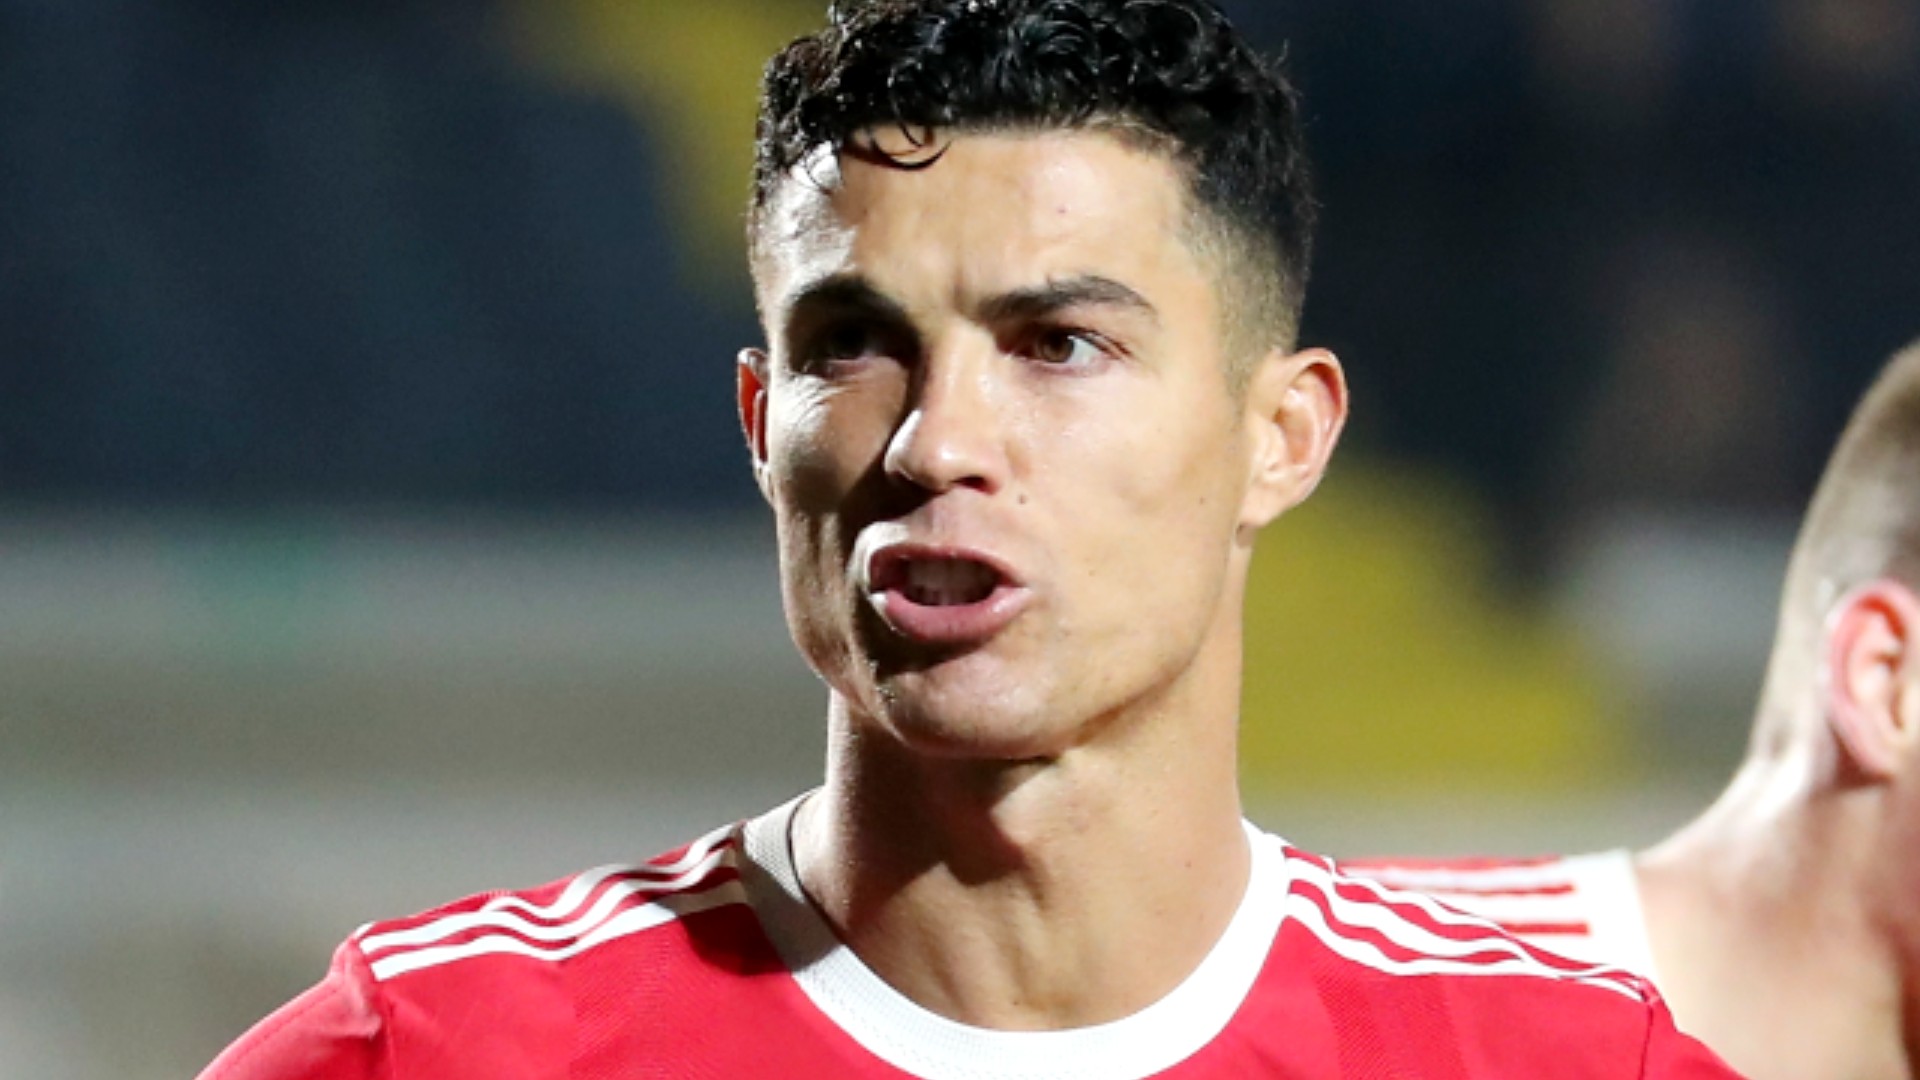 Cristiano Ronaldo pats himself on the back on Instagram, then demands Man United work harder